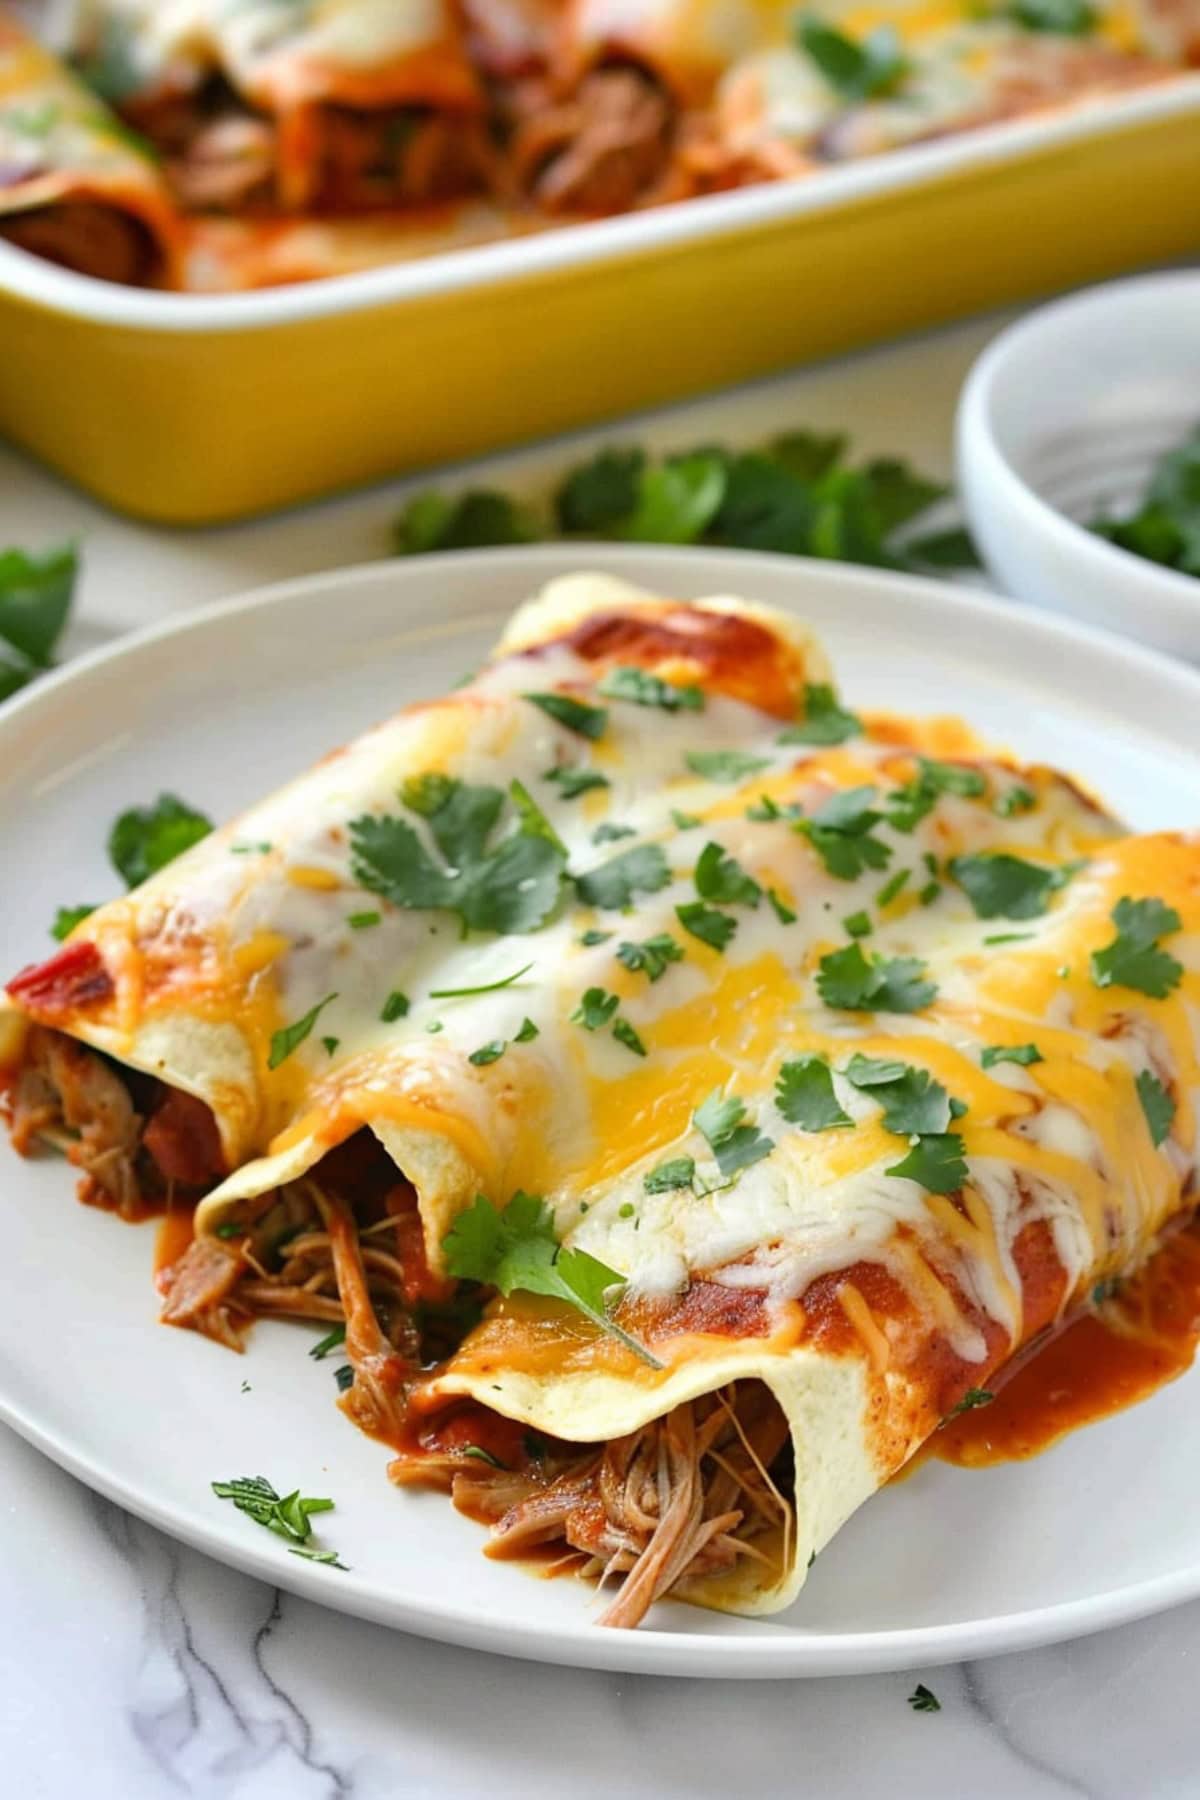 Serving of pulled pork enchiladas with sauce and melted cheese.